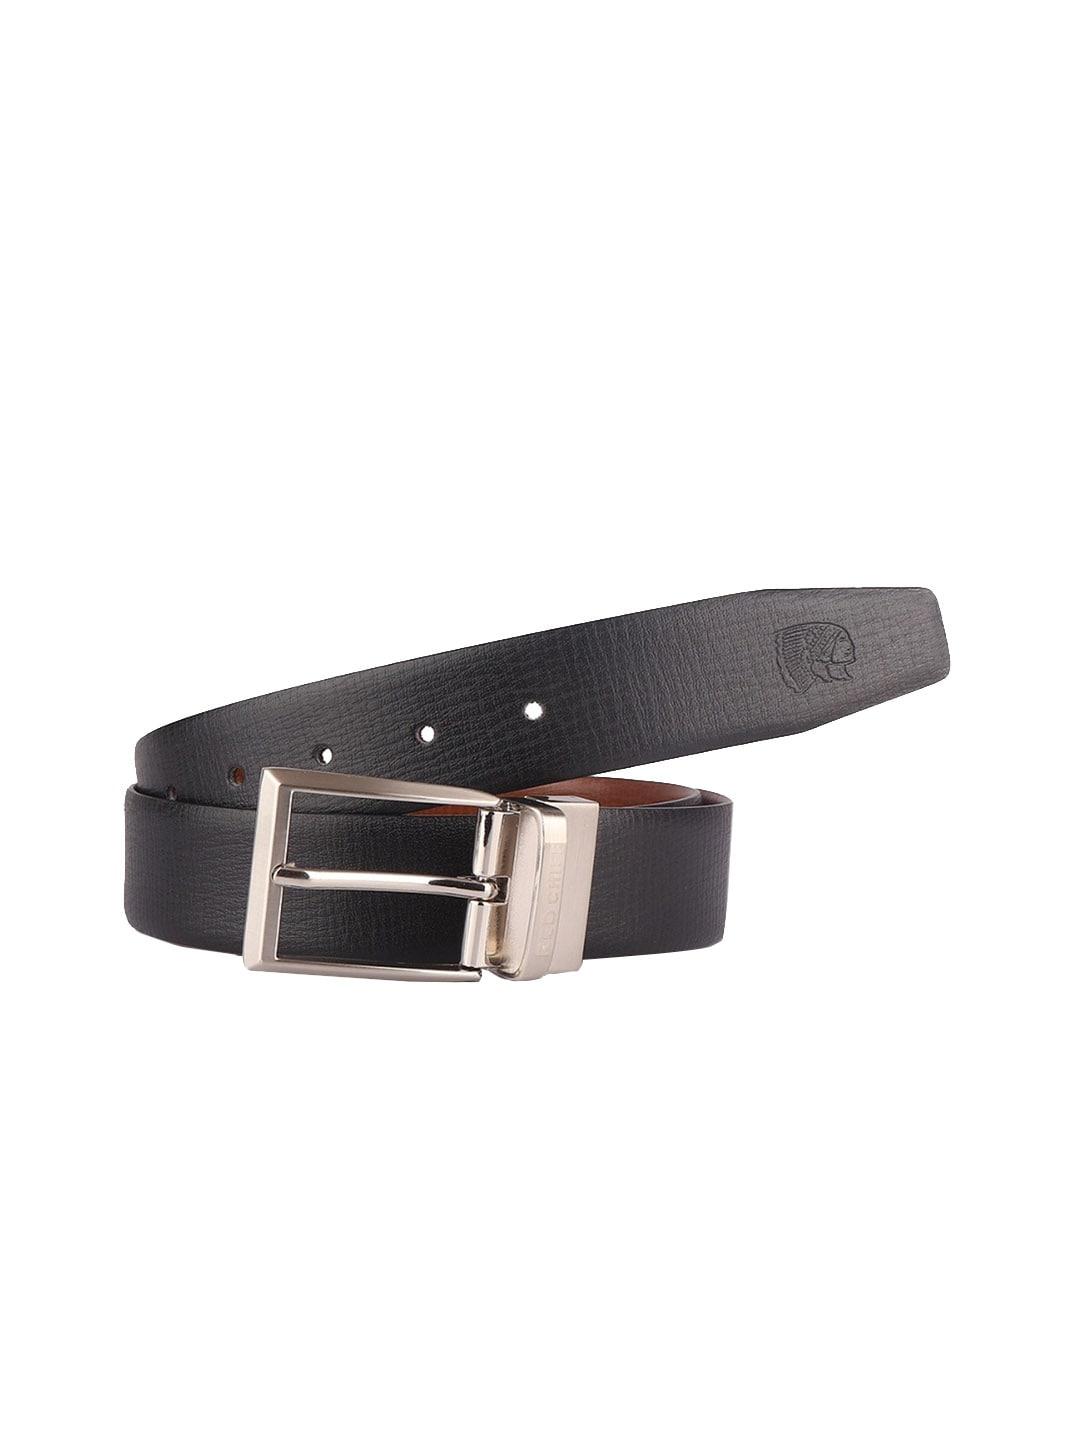 red chief men textured leather reversible belt